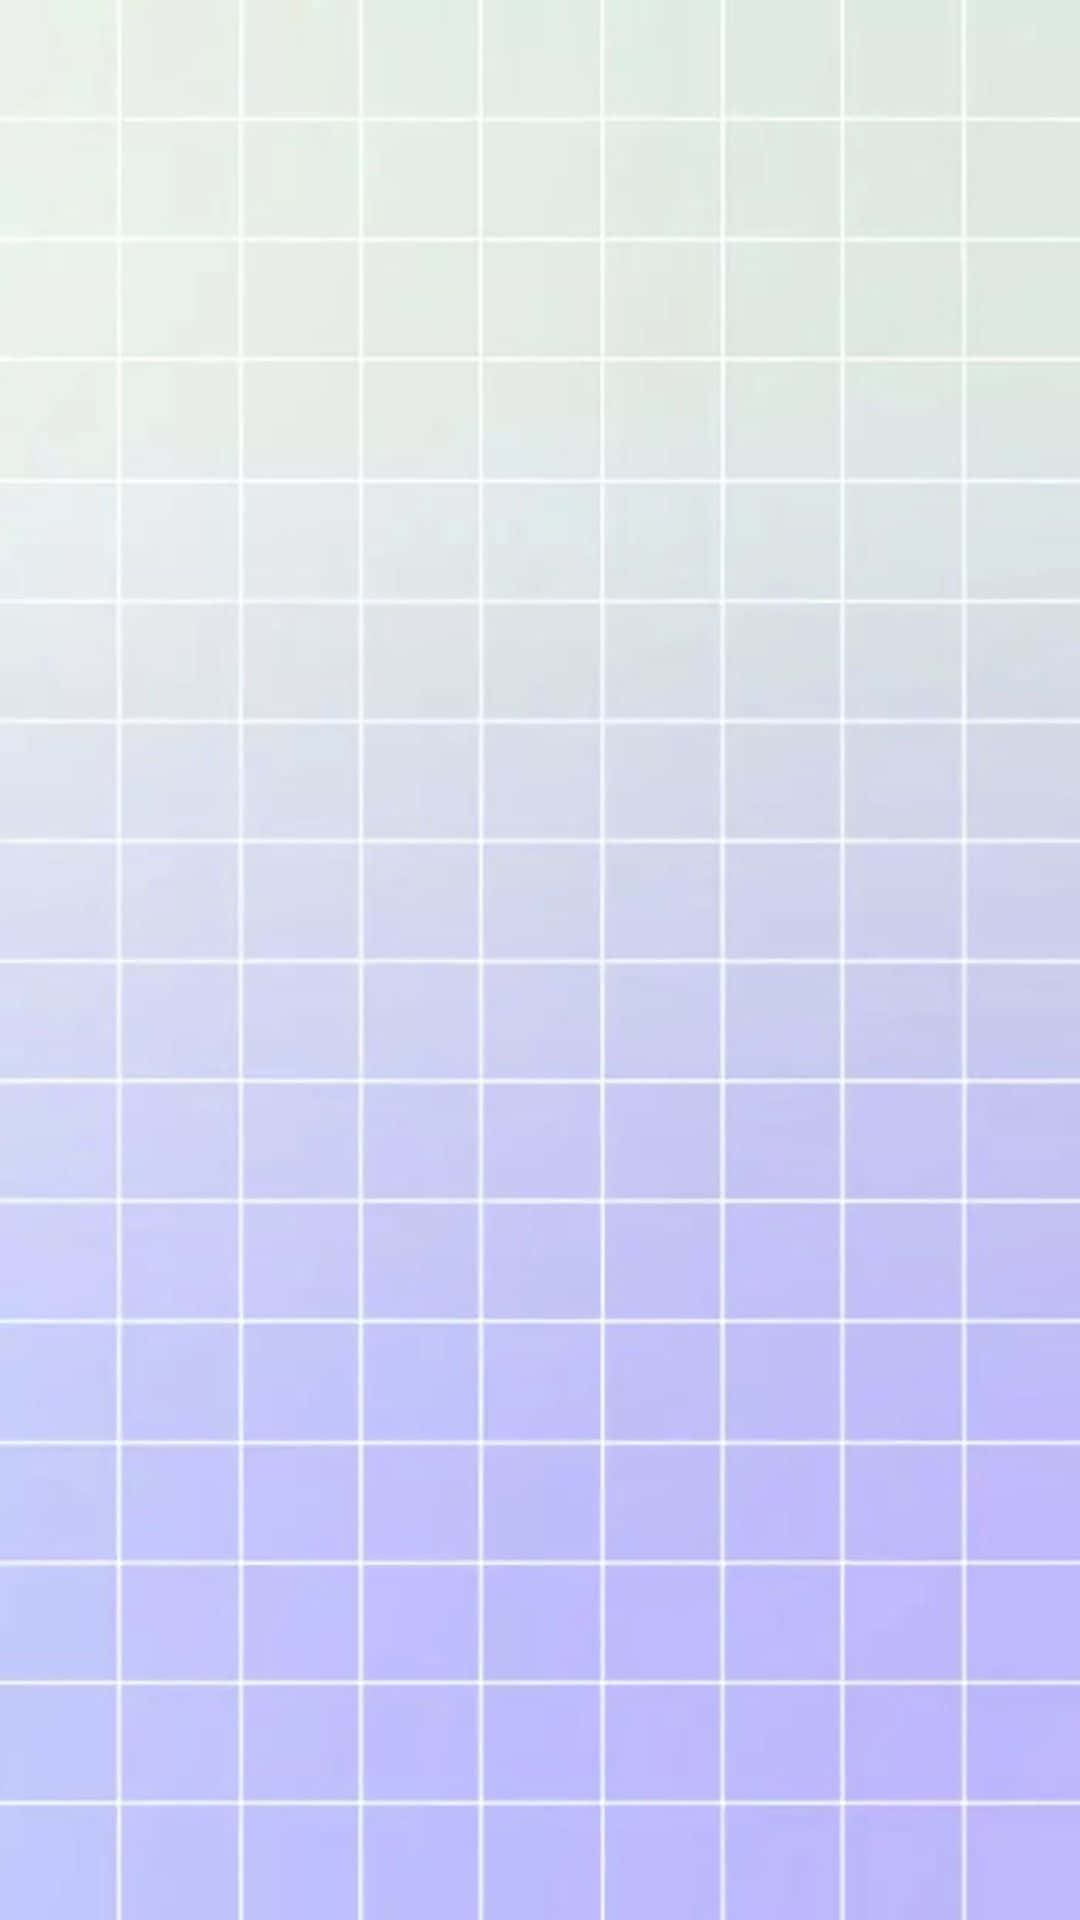 A grid of beautiful pastel colors.